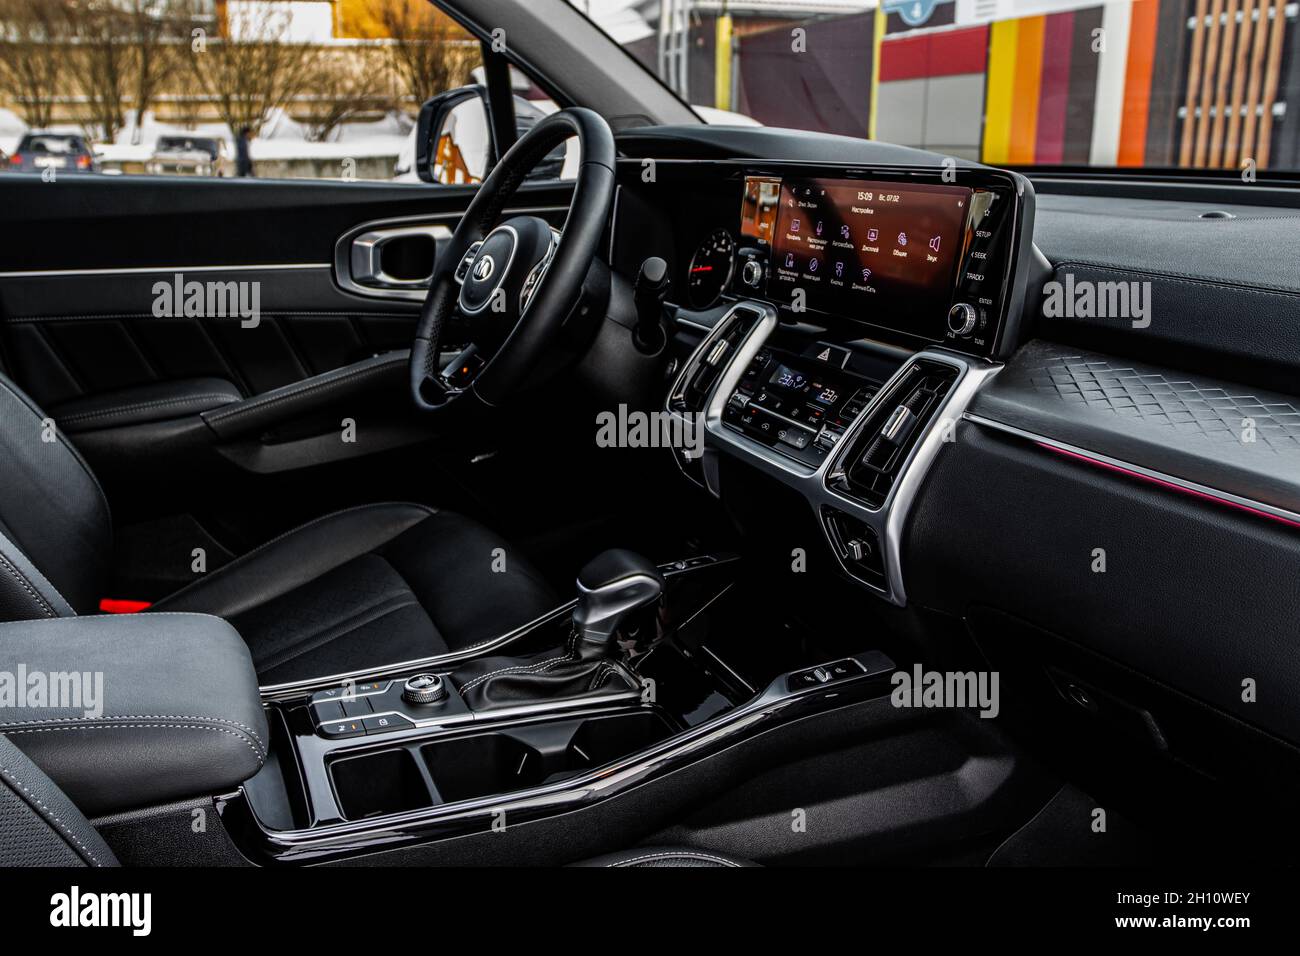 MOSCOW, RUSSIA - FEBRUARY 7, 2021 Kia Sorento Fourth generation MQ4.  Compact crossover SUV model year 2020. Exterior back view close up view on  nature Stock Photo - Alamy